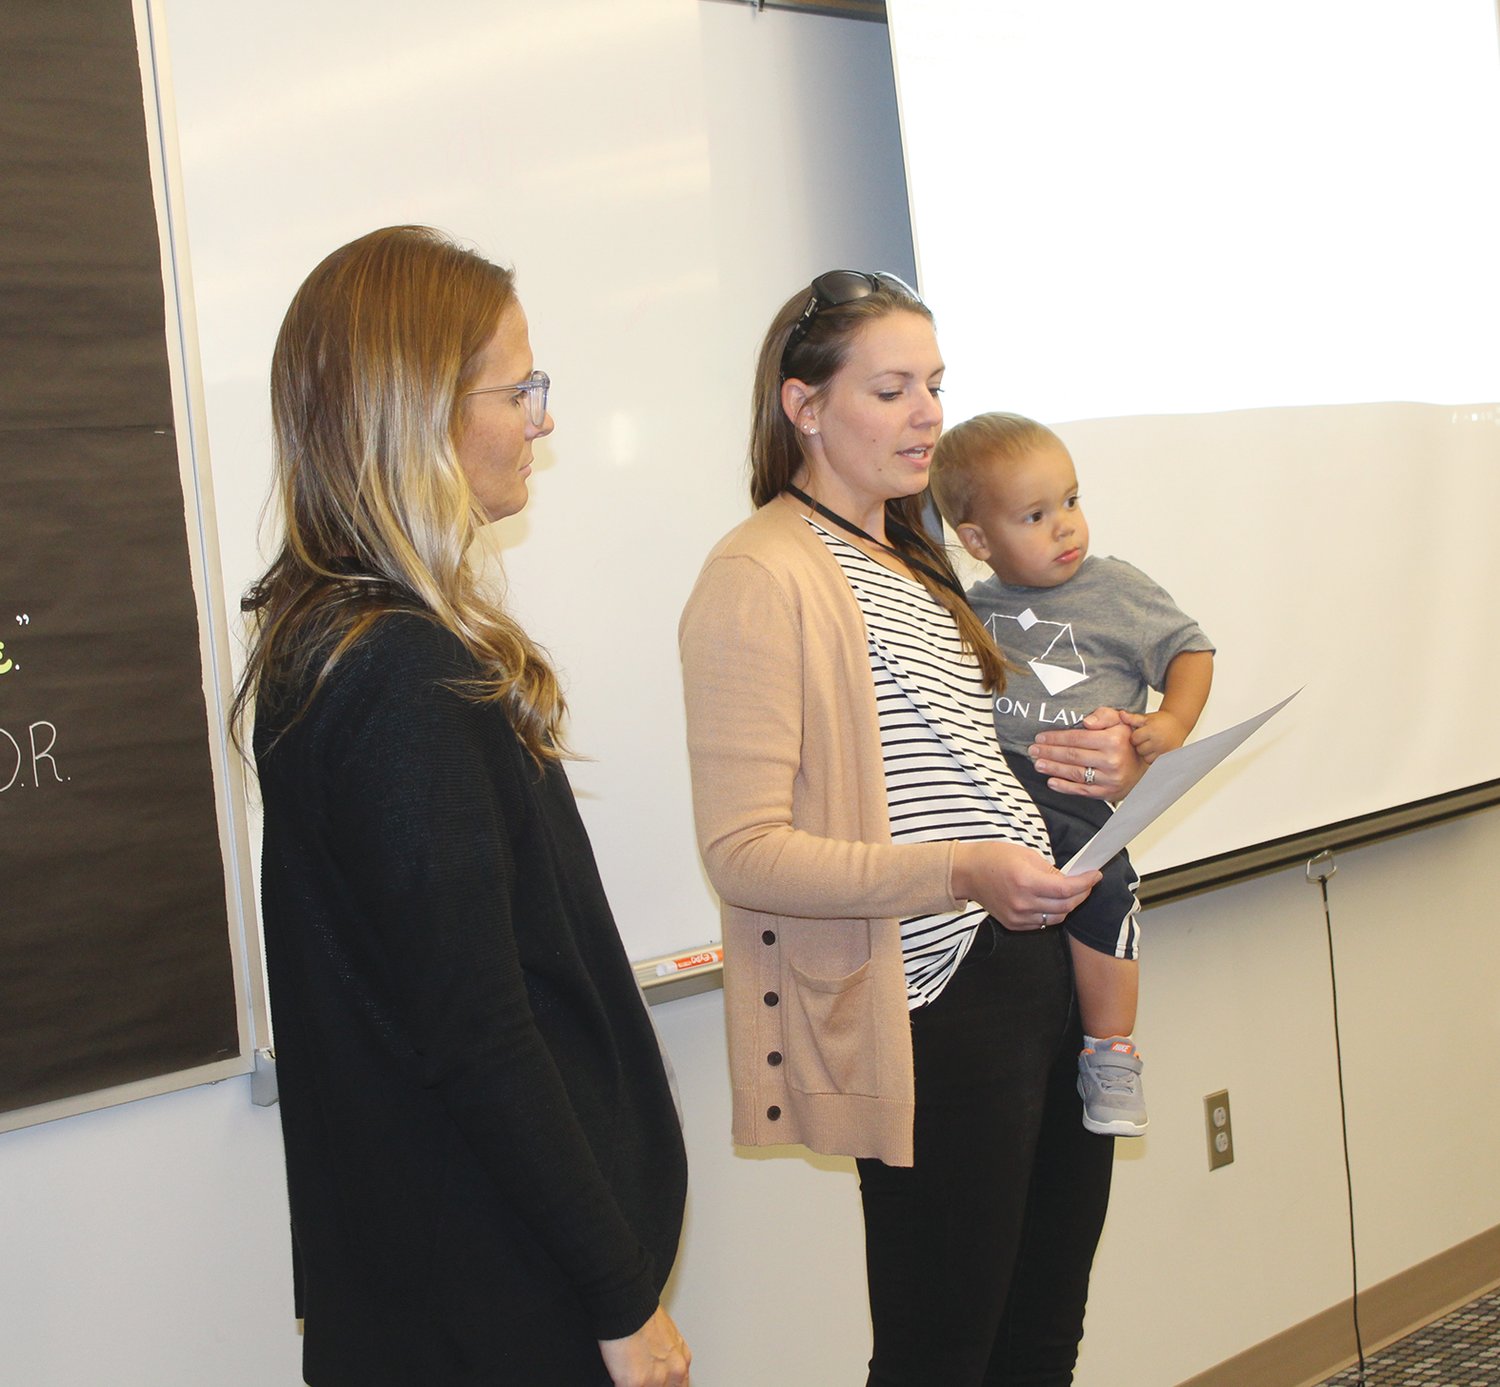 Kiley Koch (left) and Lindsey Knutson spoke during Monday's Board of Education meeting on the upcoming Job Shadow Day.